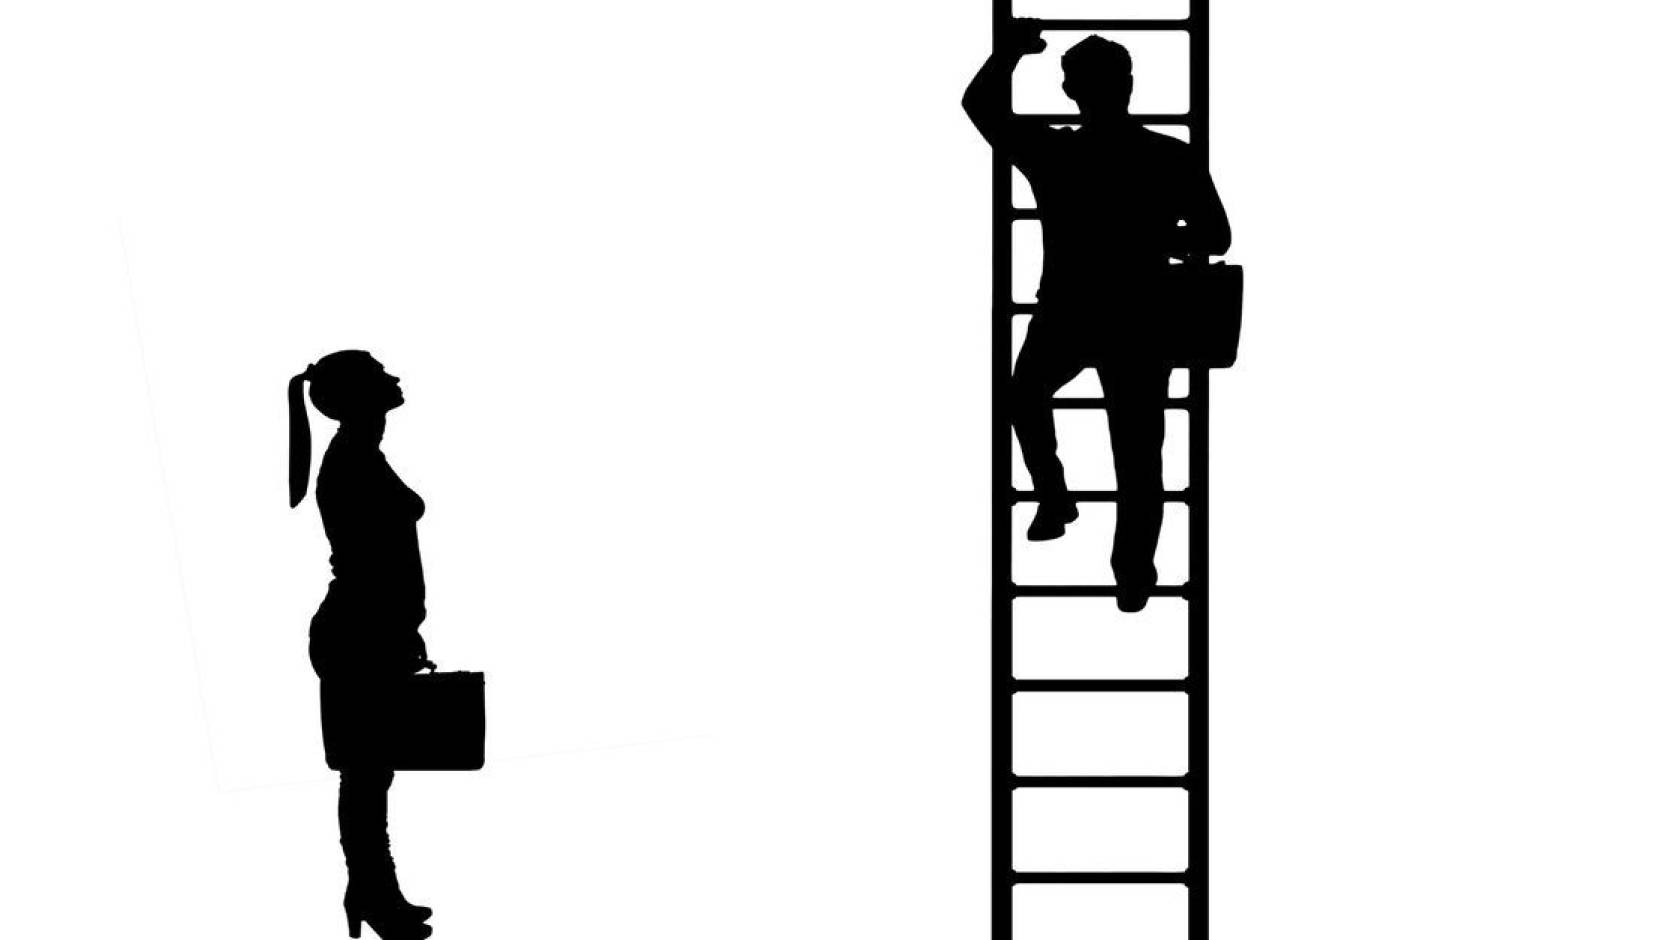 Silhouette illustration of a woman in heels holding a briefcase looking up at a man with a briefcase climbing a ladder.